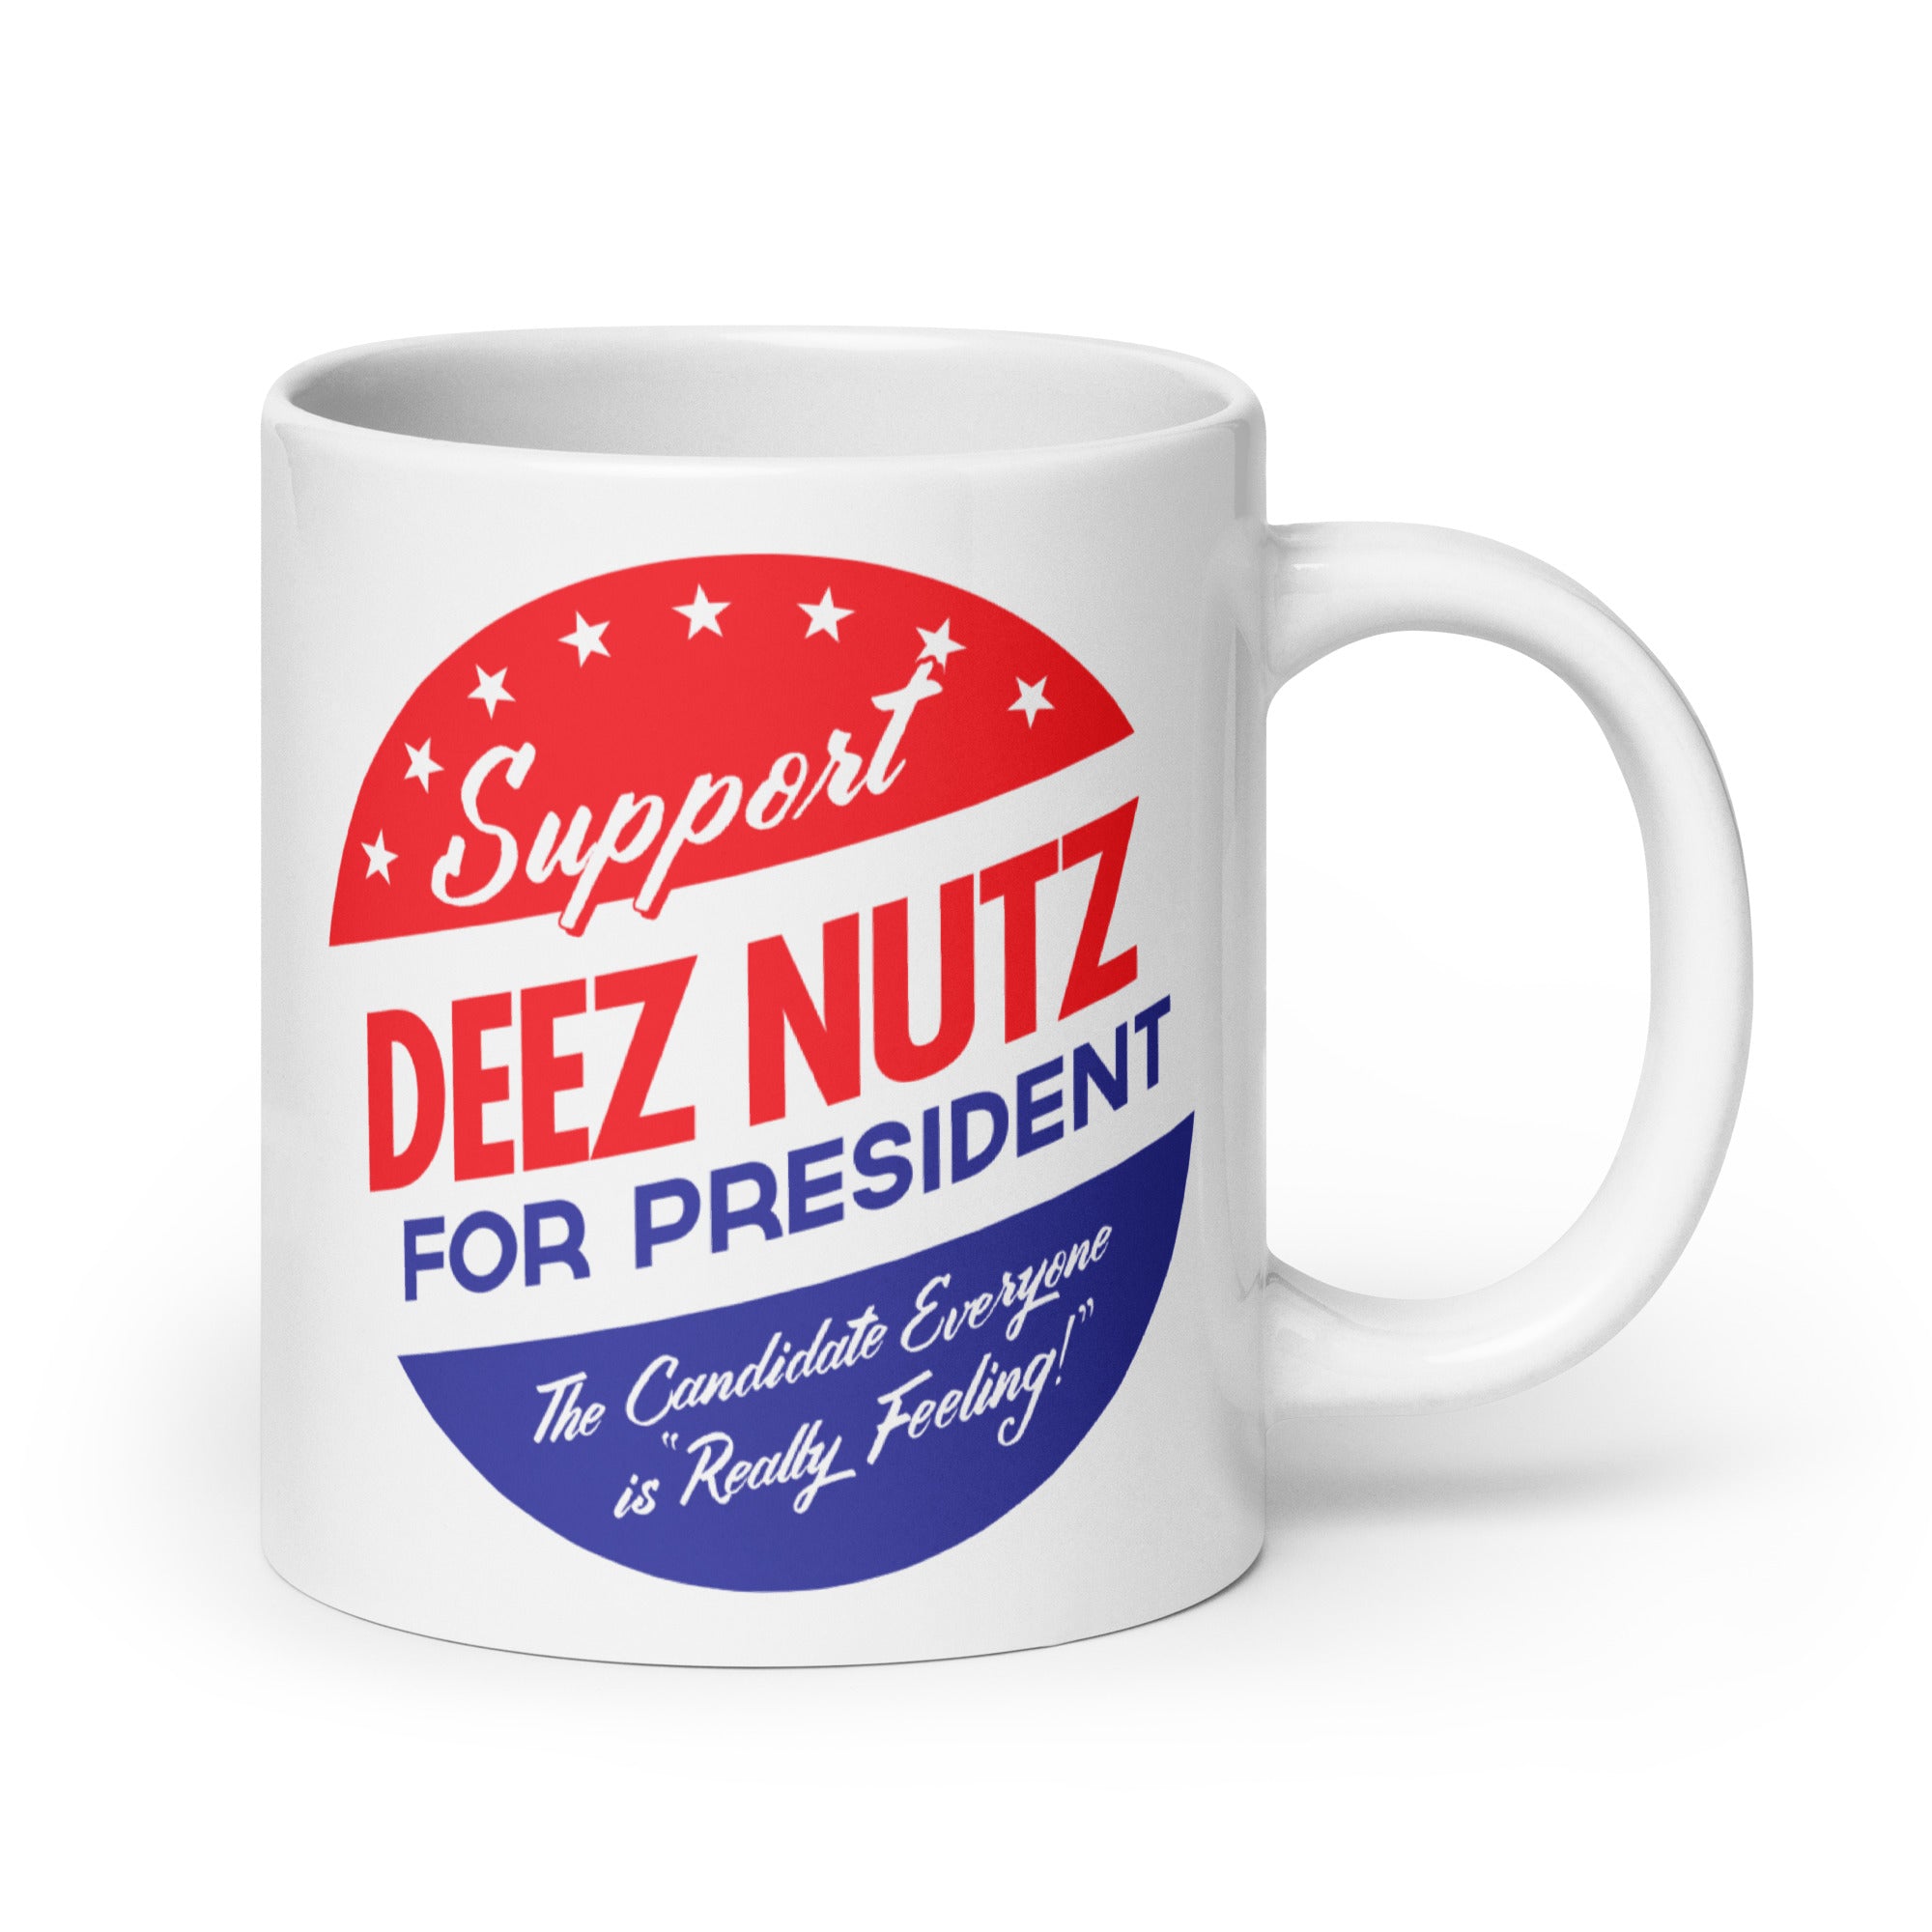 Deez Nuts for President Coffee Mugs